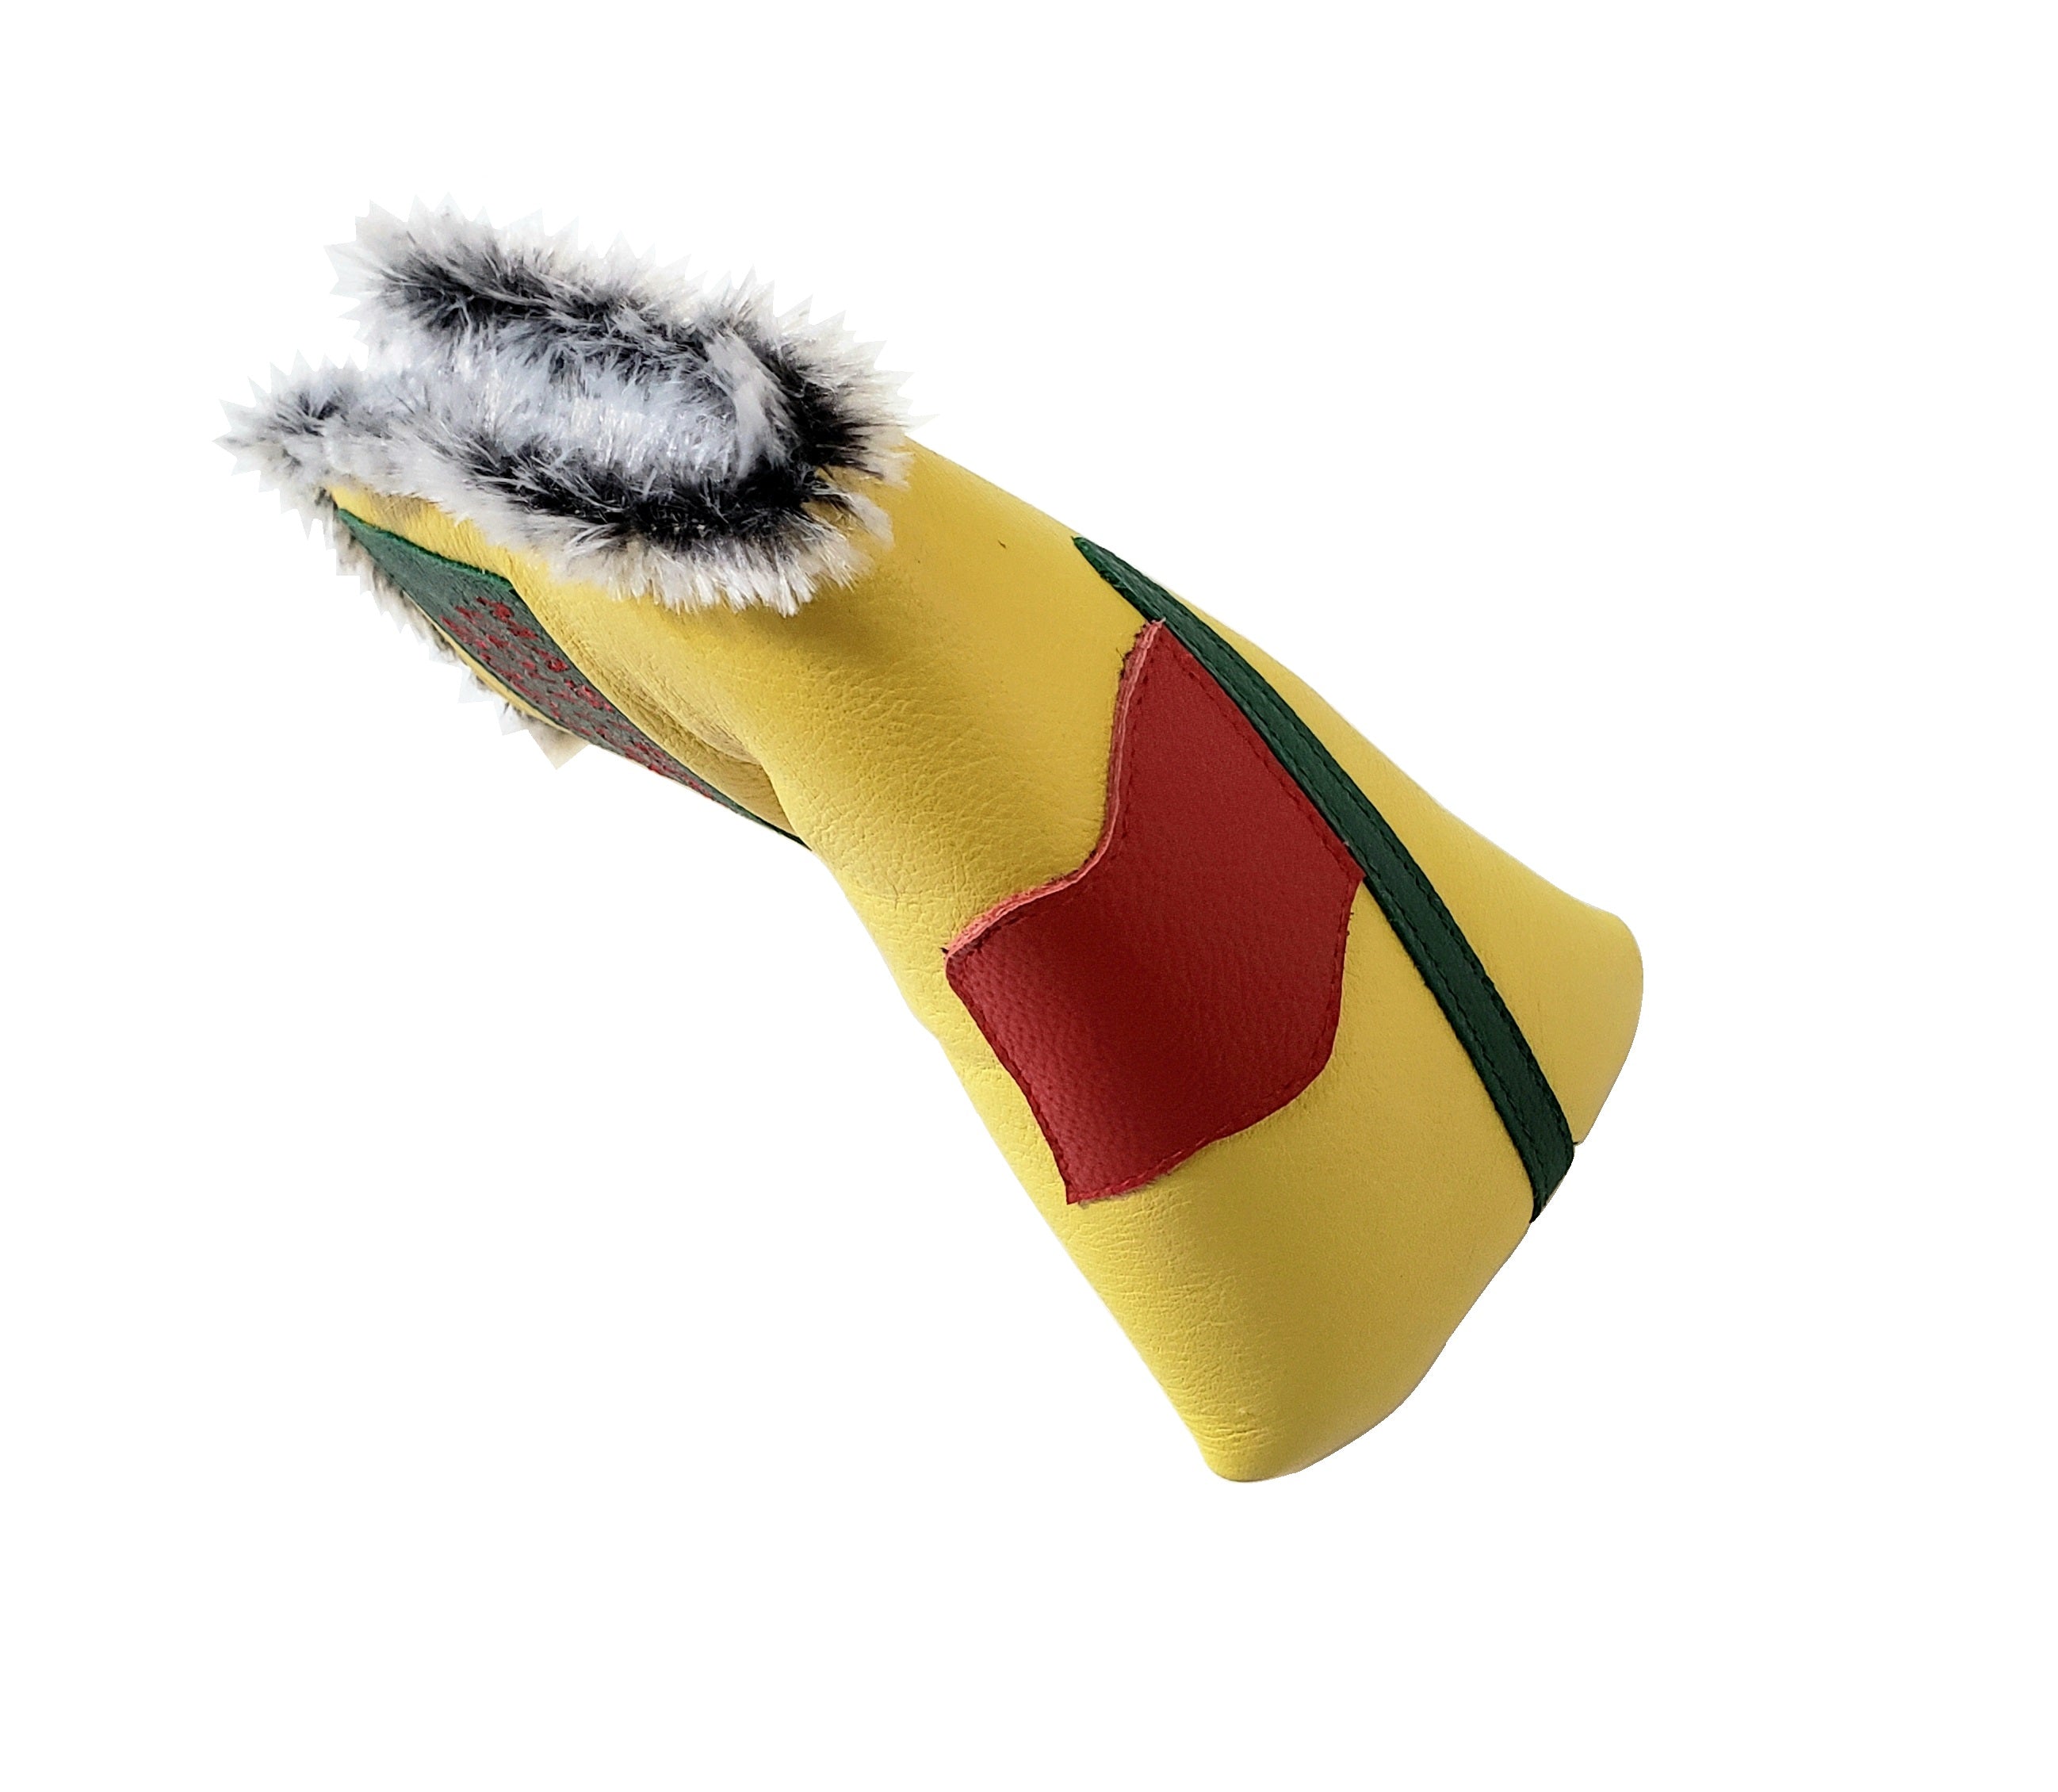 NEW! The 2020 Masters/Augusta Inspired  Putter Cover - Robert Mark Golf